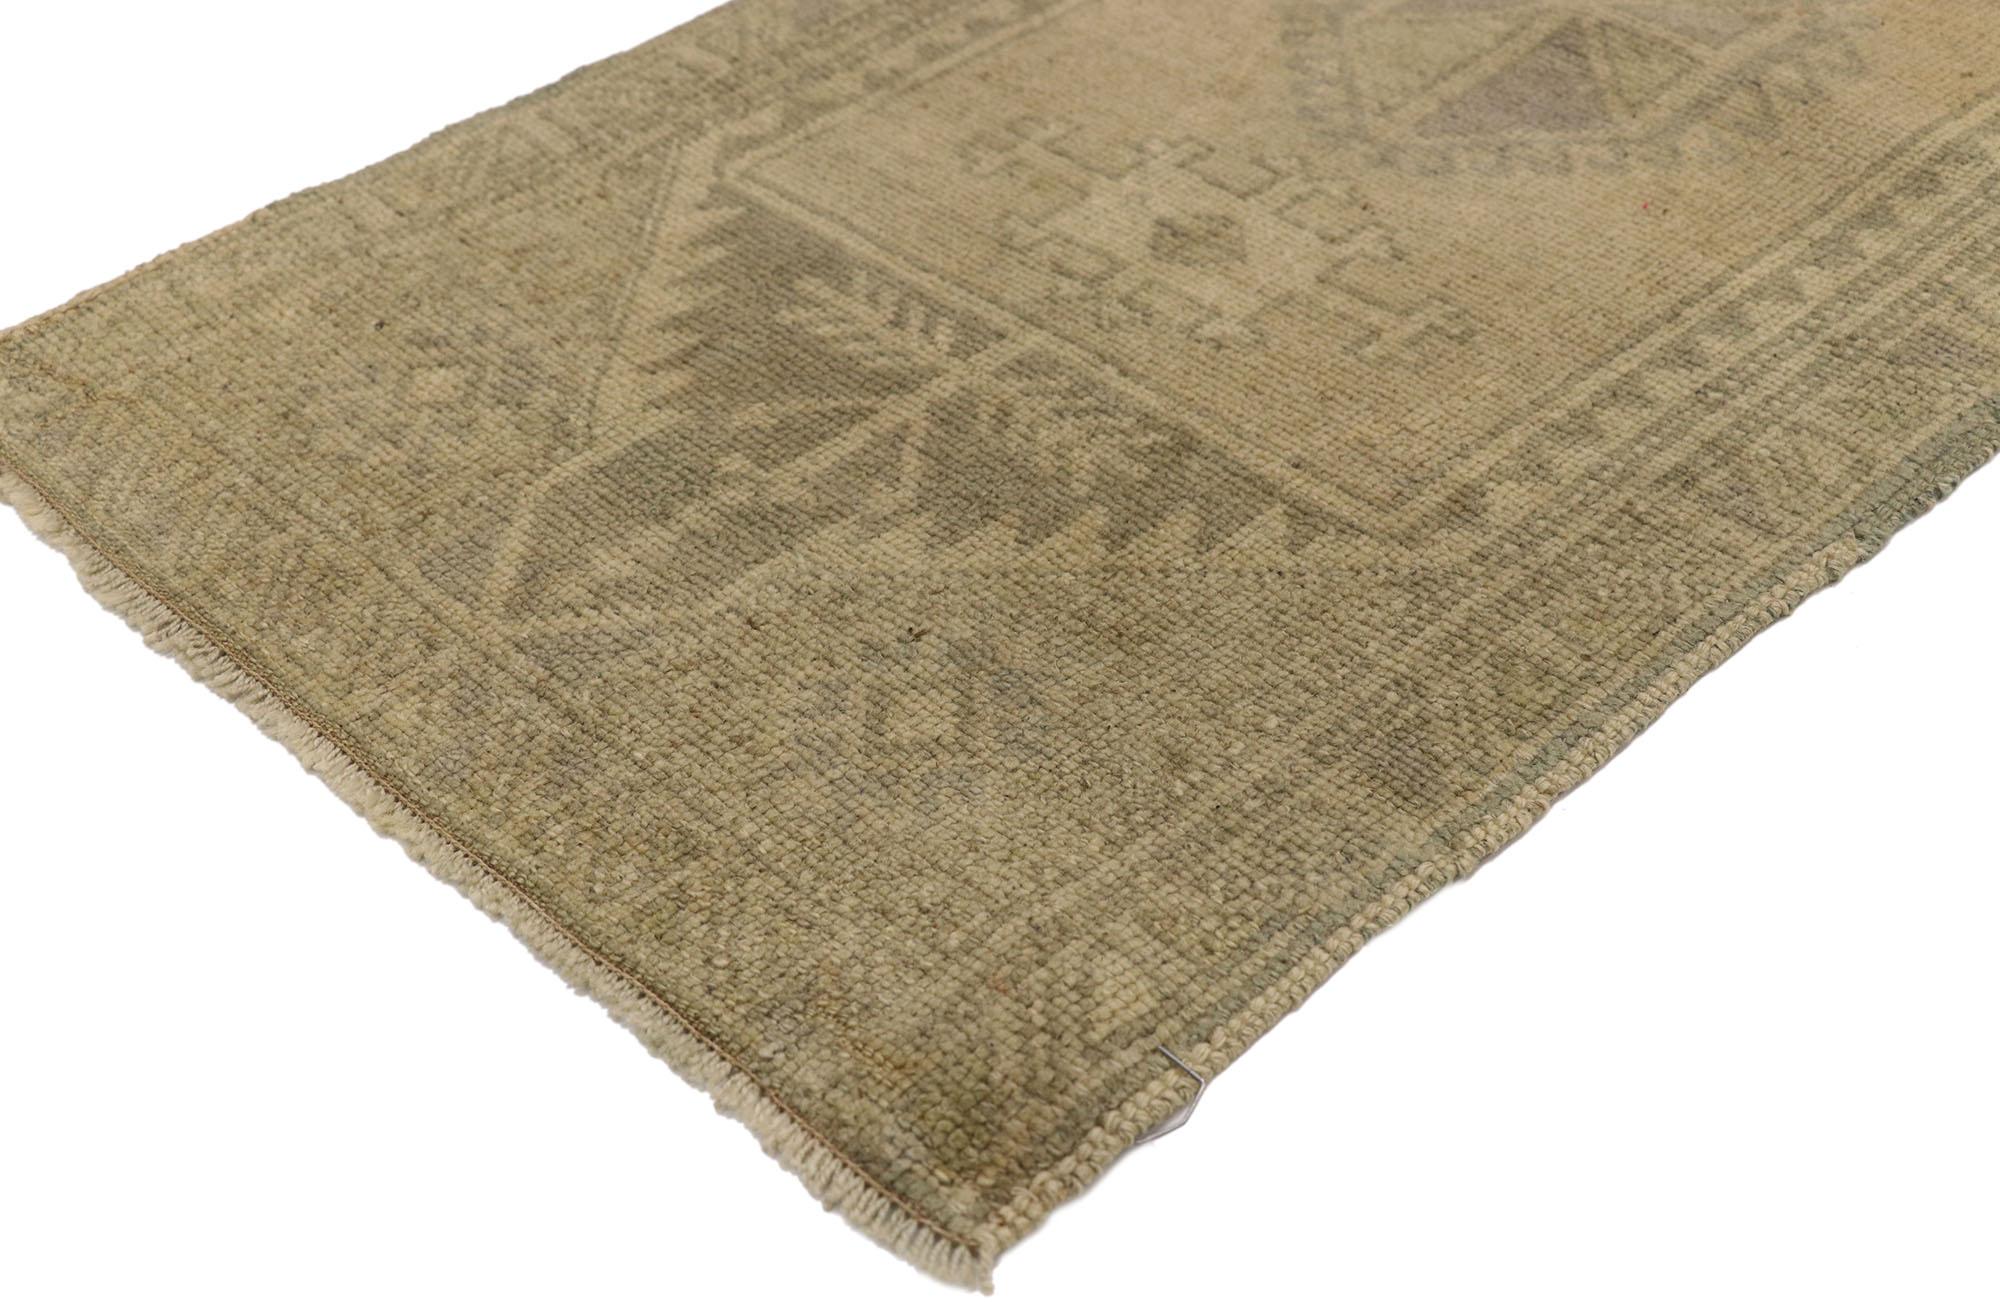 51248 Vintage Turkish Yastik Rug, 01'08 x 03'08. Antique-washed Turkish Yastik rugs epitomize traditional craftsmanship, undergoing a meticulous washing process to imbue them with a softened, aged appearance that retains their integrity. This